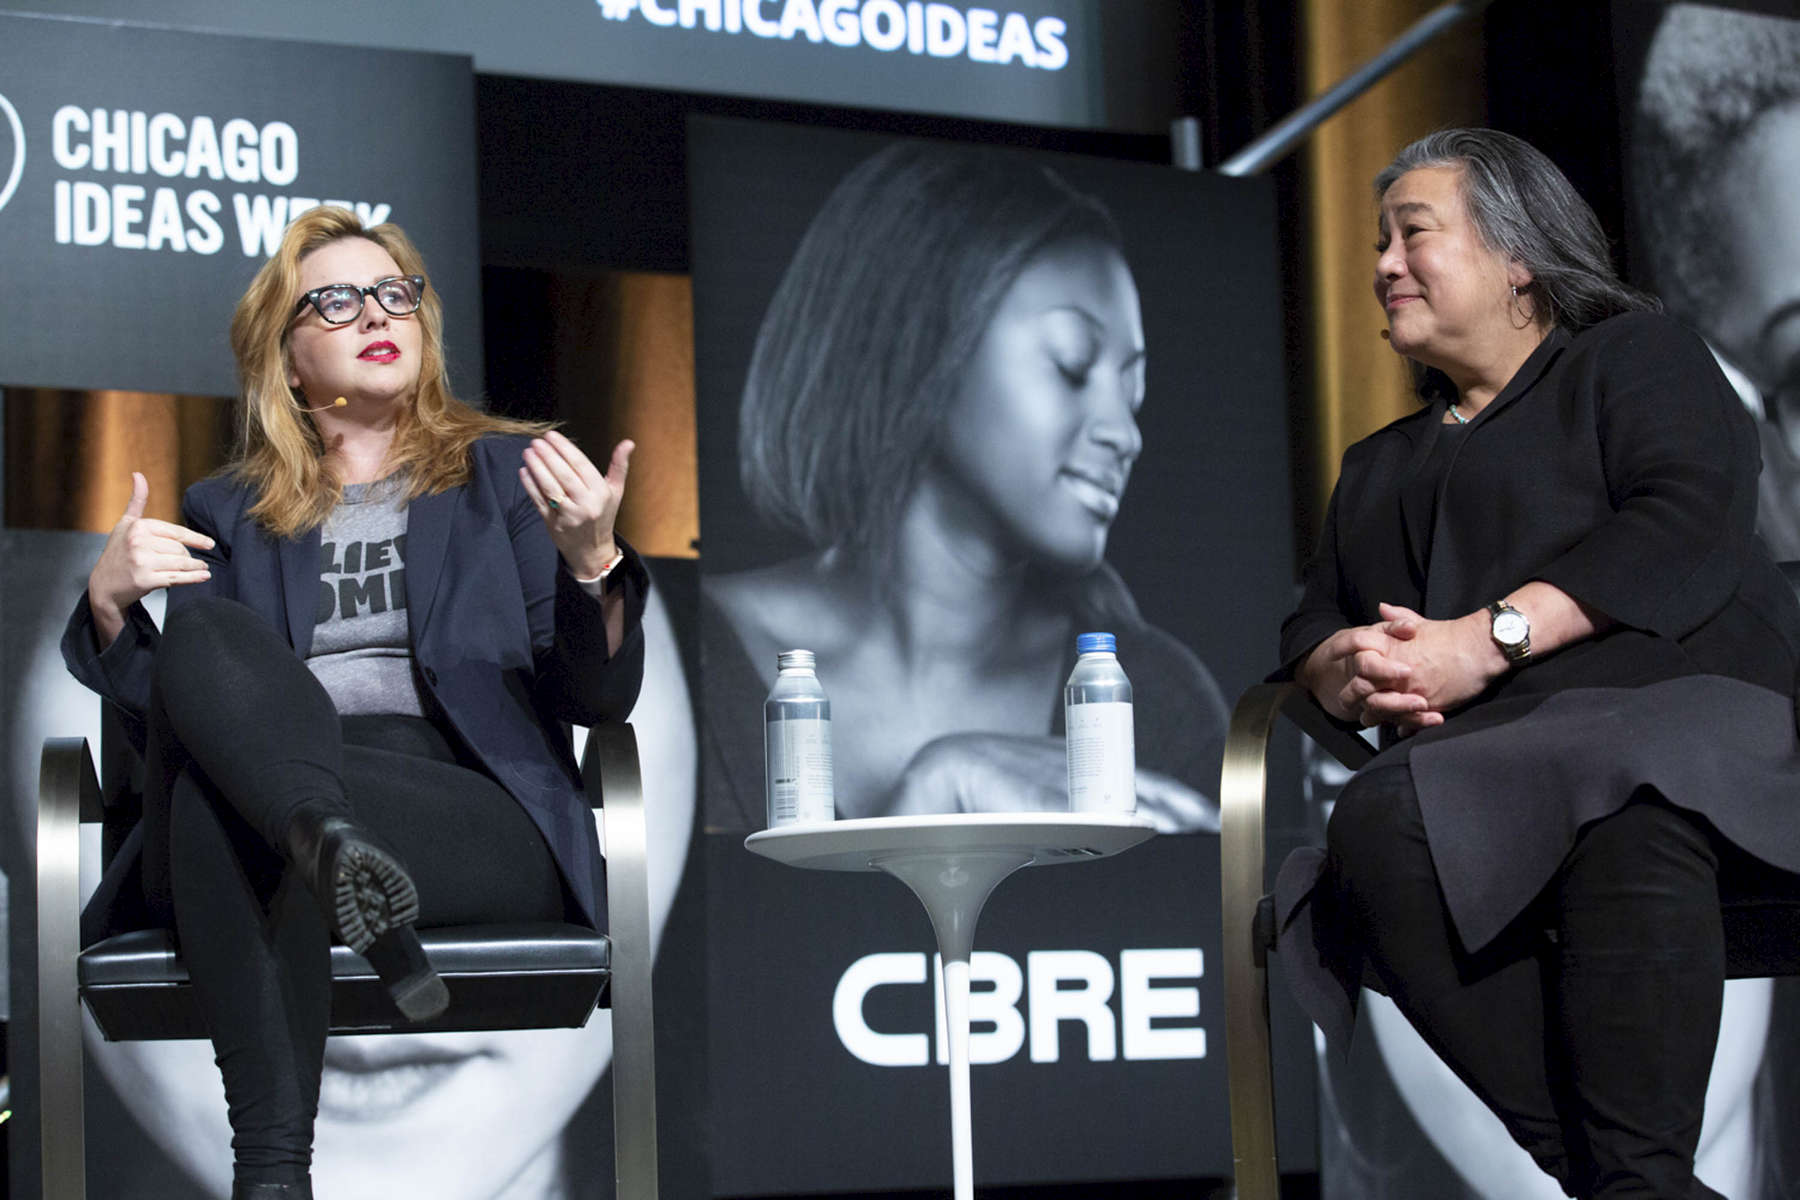 CHICAGO, IL - OCTOBER 16: Amber Tamblyn (left), Writer, Actress, & Director, and Tina Tchen, Leader of the Time’s Up Legal Defense Fund, speak during, “#TimesUp: What’s Next?” presented by CBRE. (Photo by Beth Rooney/Chicago Ideas Week)